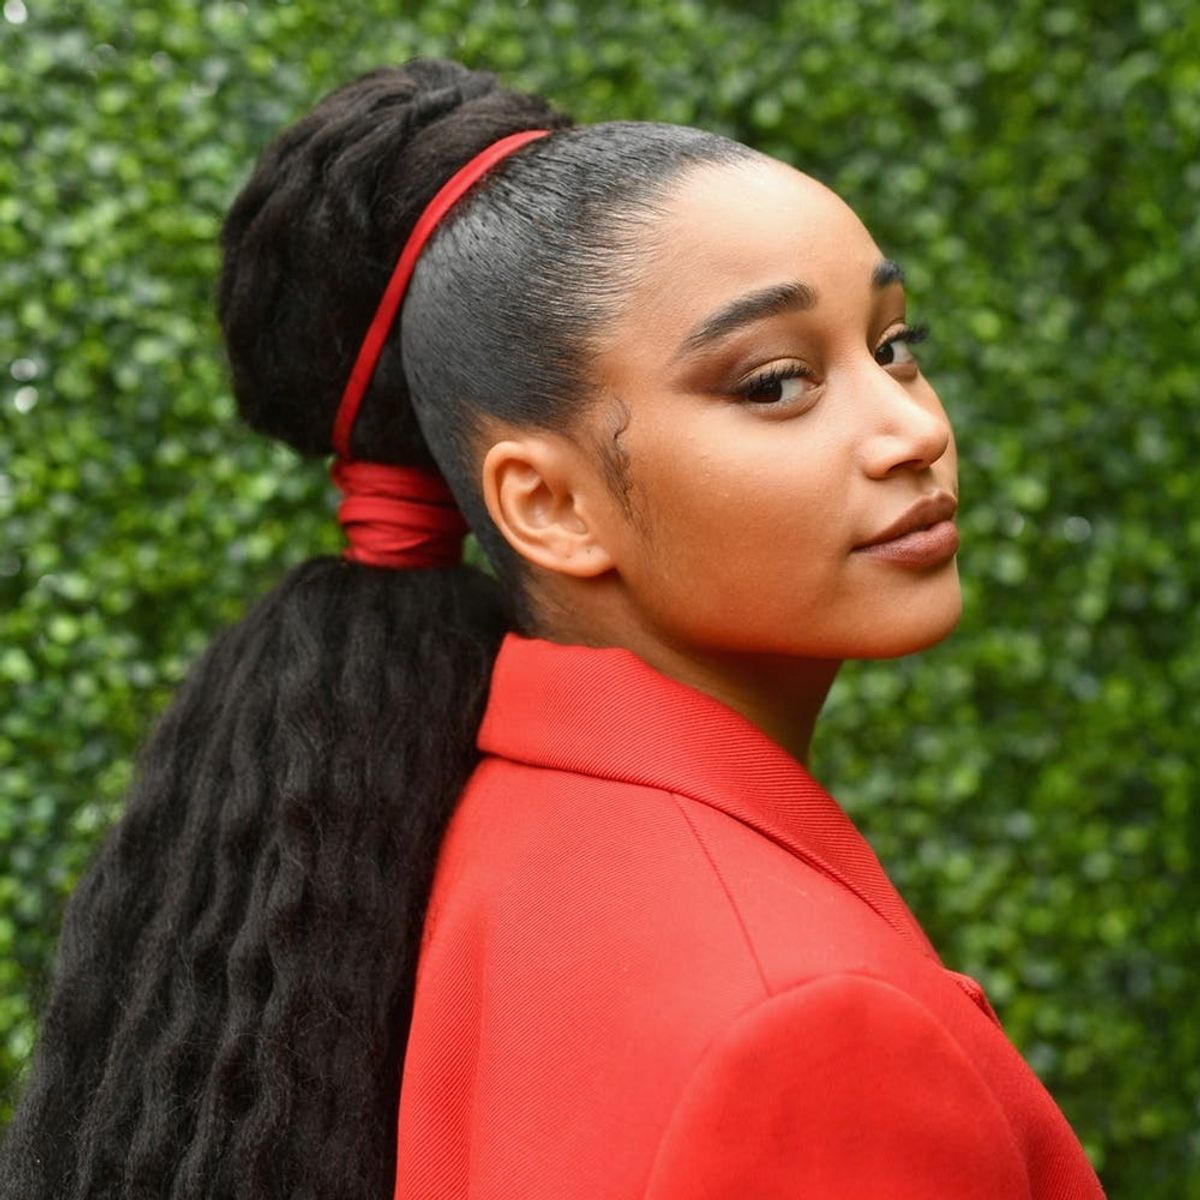 ‘Hunger Games’ Star Amandla Stenberg Comes Out as Gay